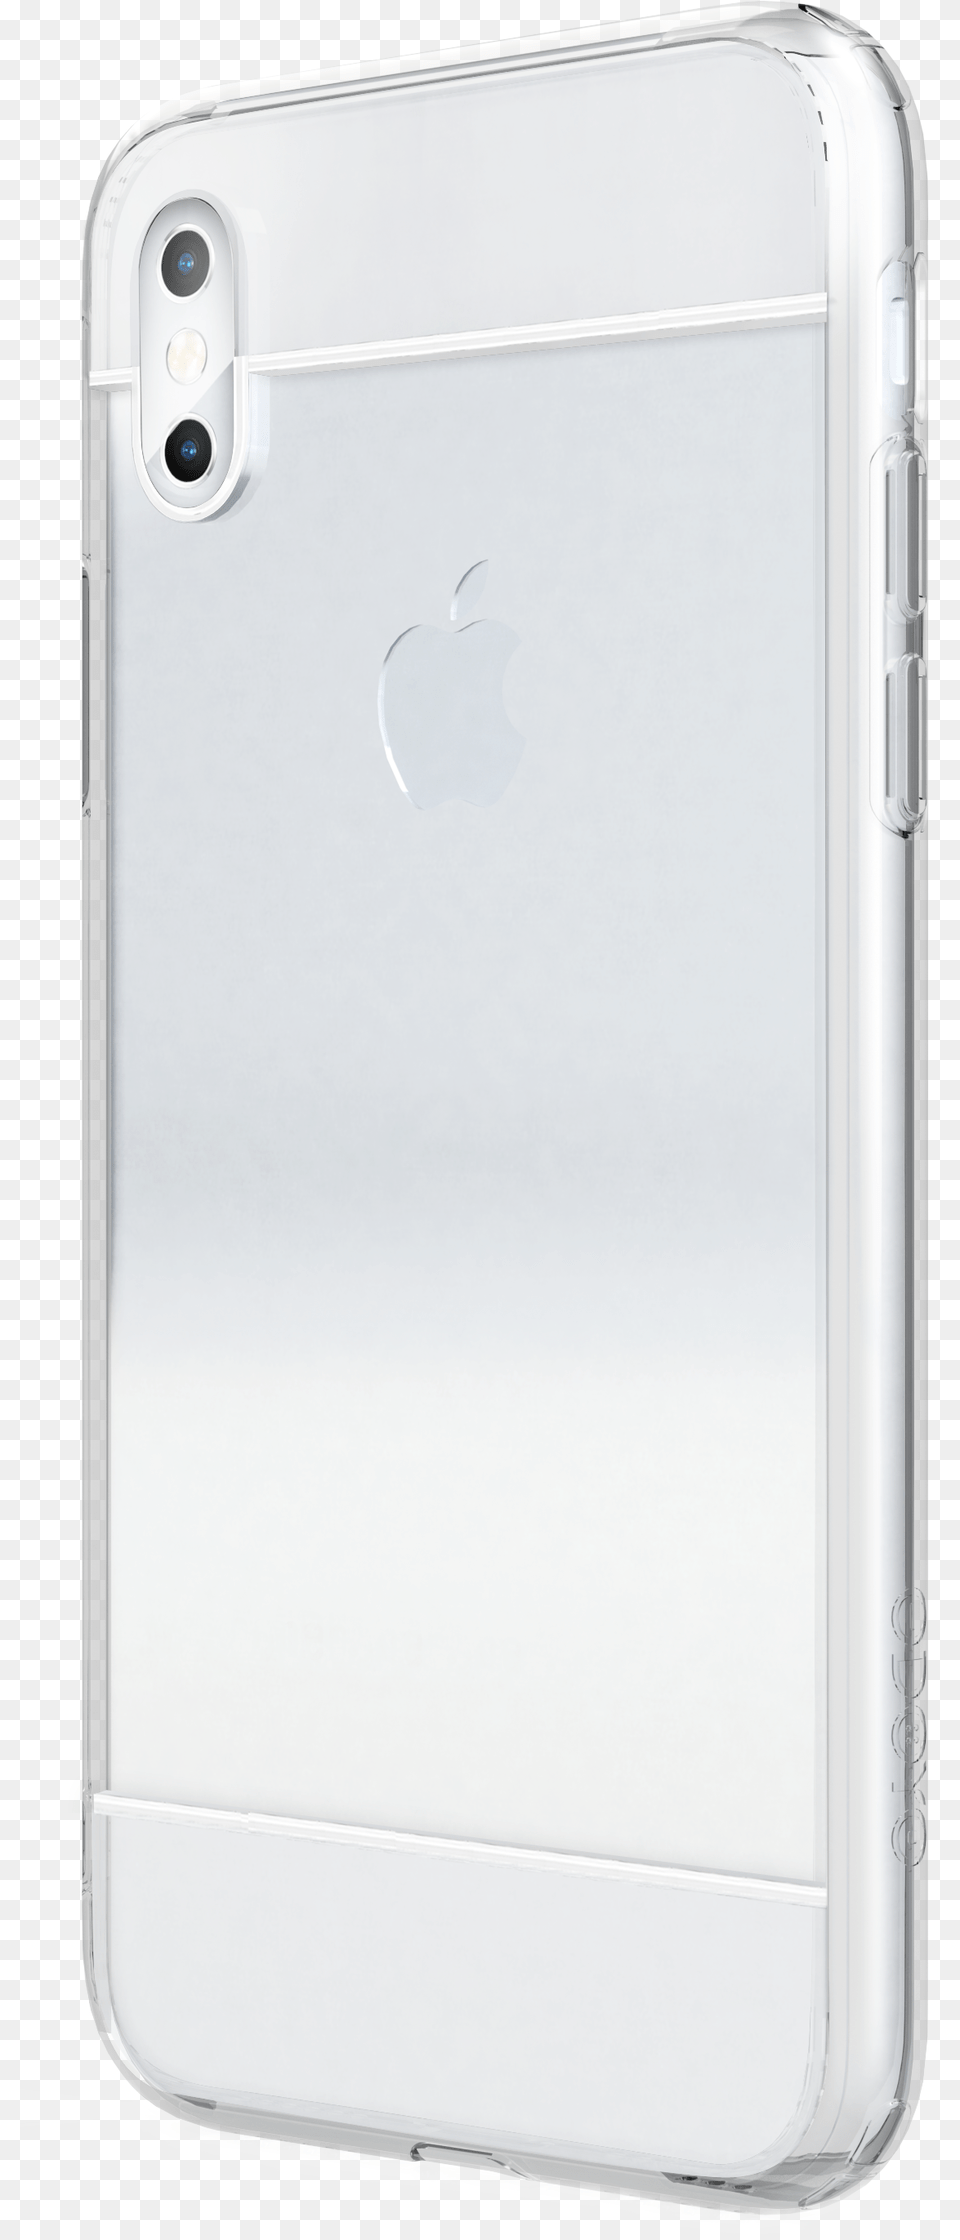 Clear Edge For Iphone X Crystal Black U2014 Space Iphone, Electronics, Mobile Phone, Phone, White Board Free Png Download